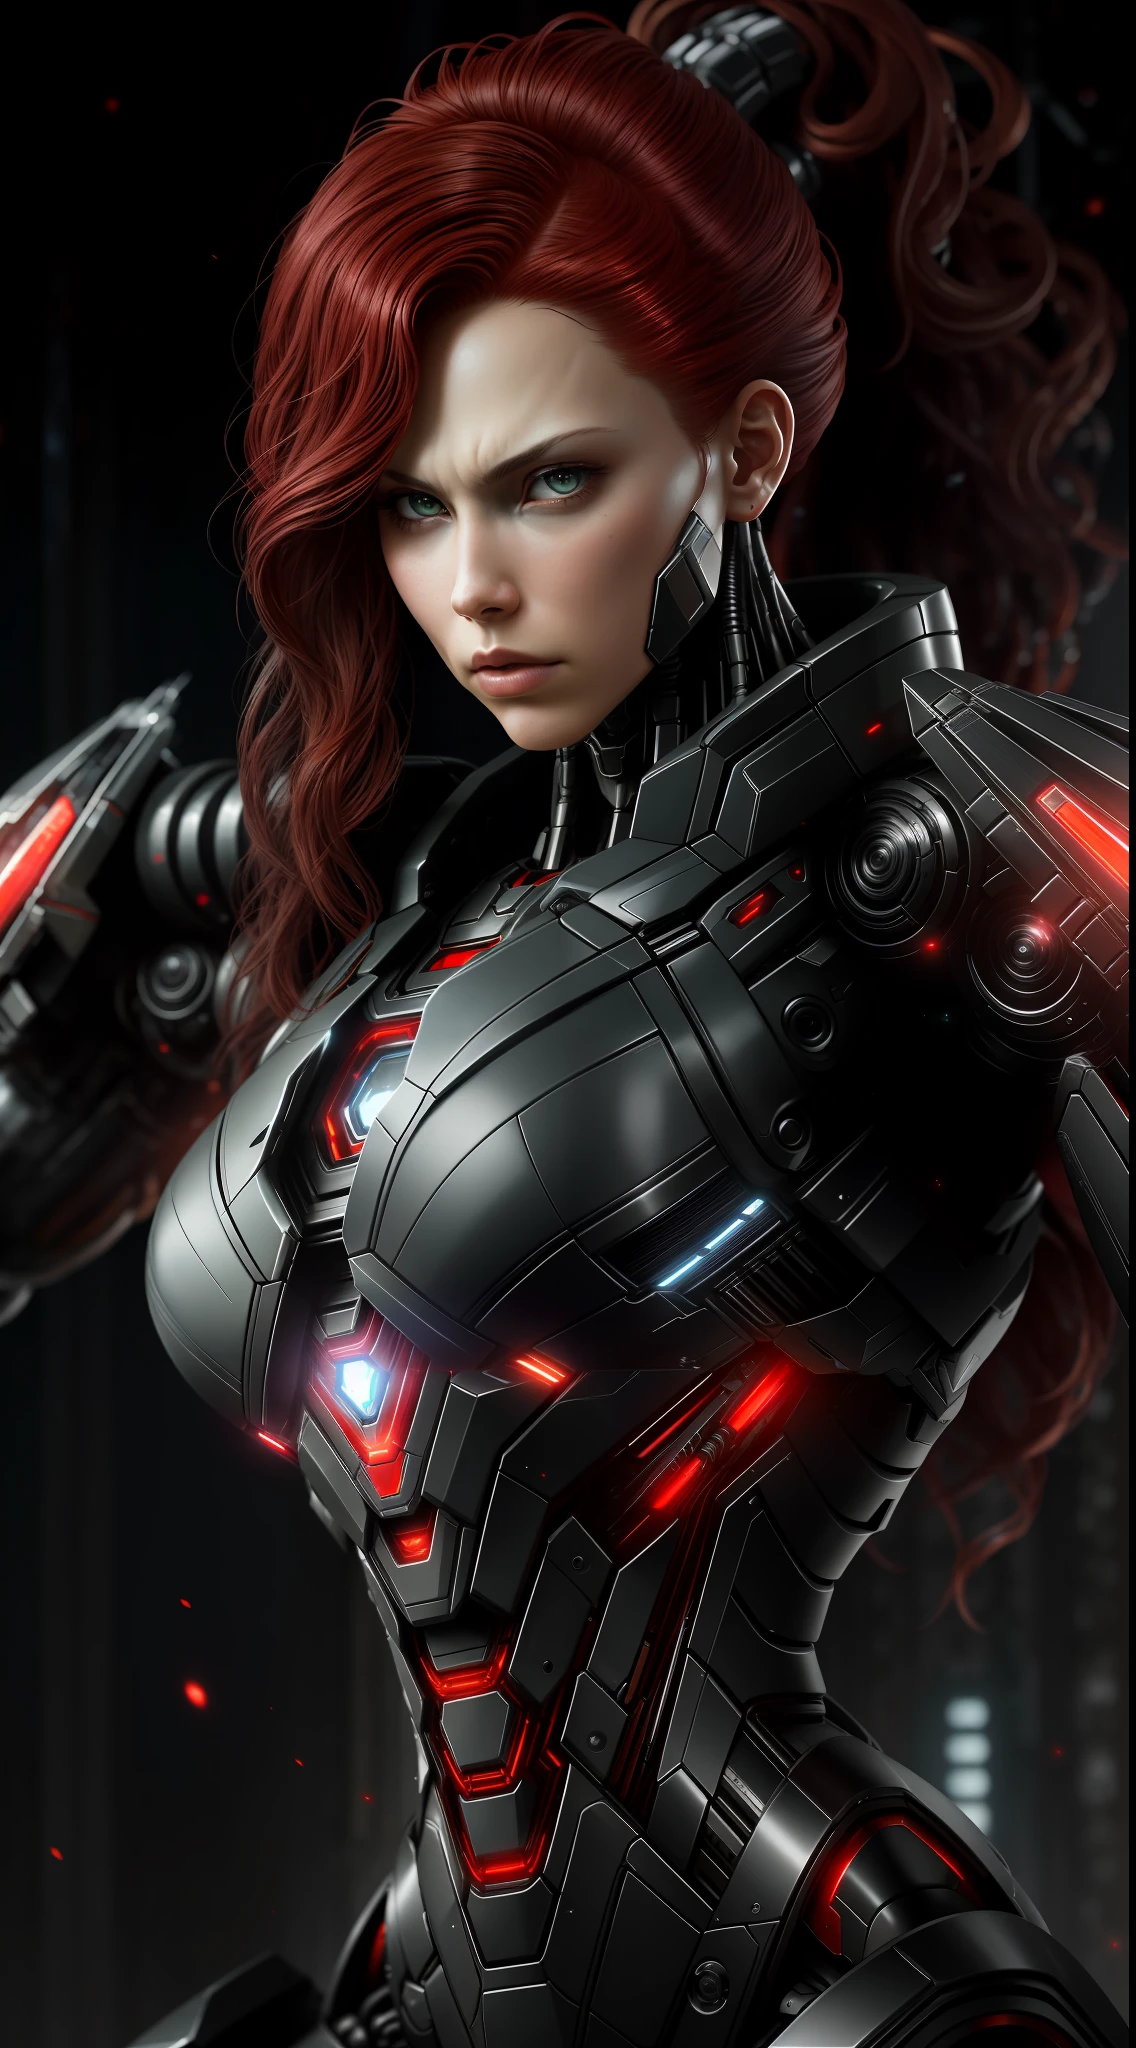 Black Widow from Marvel photography, biomechanical, complex robot, full growth, hyperrealistic, insane small details, extremely clean lines, cyberpunk aesthetic, a masterpiece featured on Zbrush Central